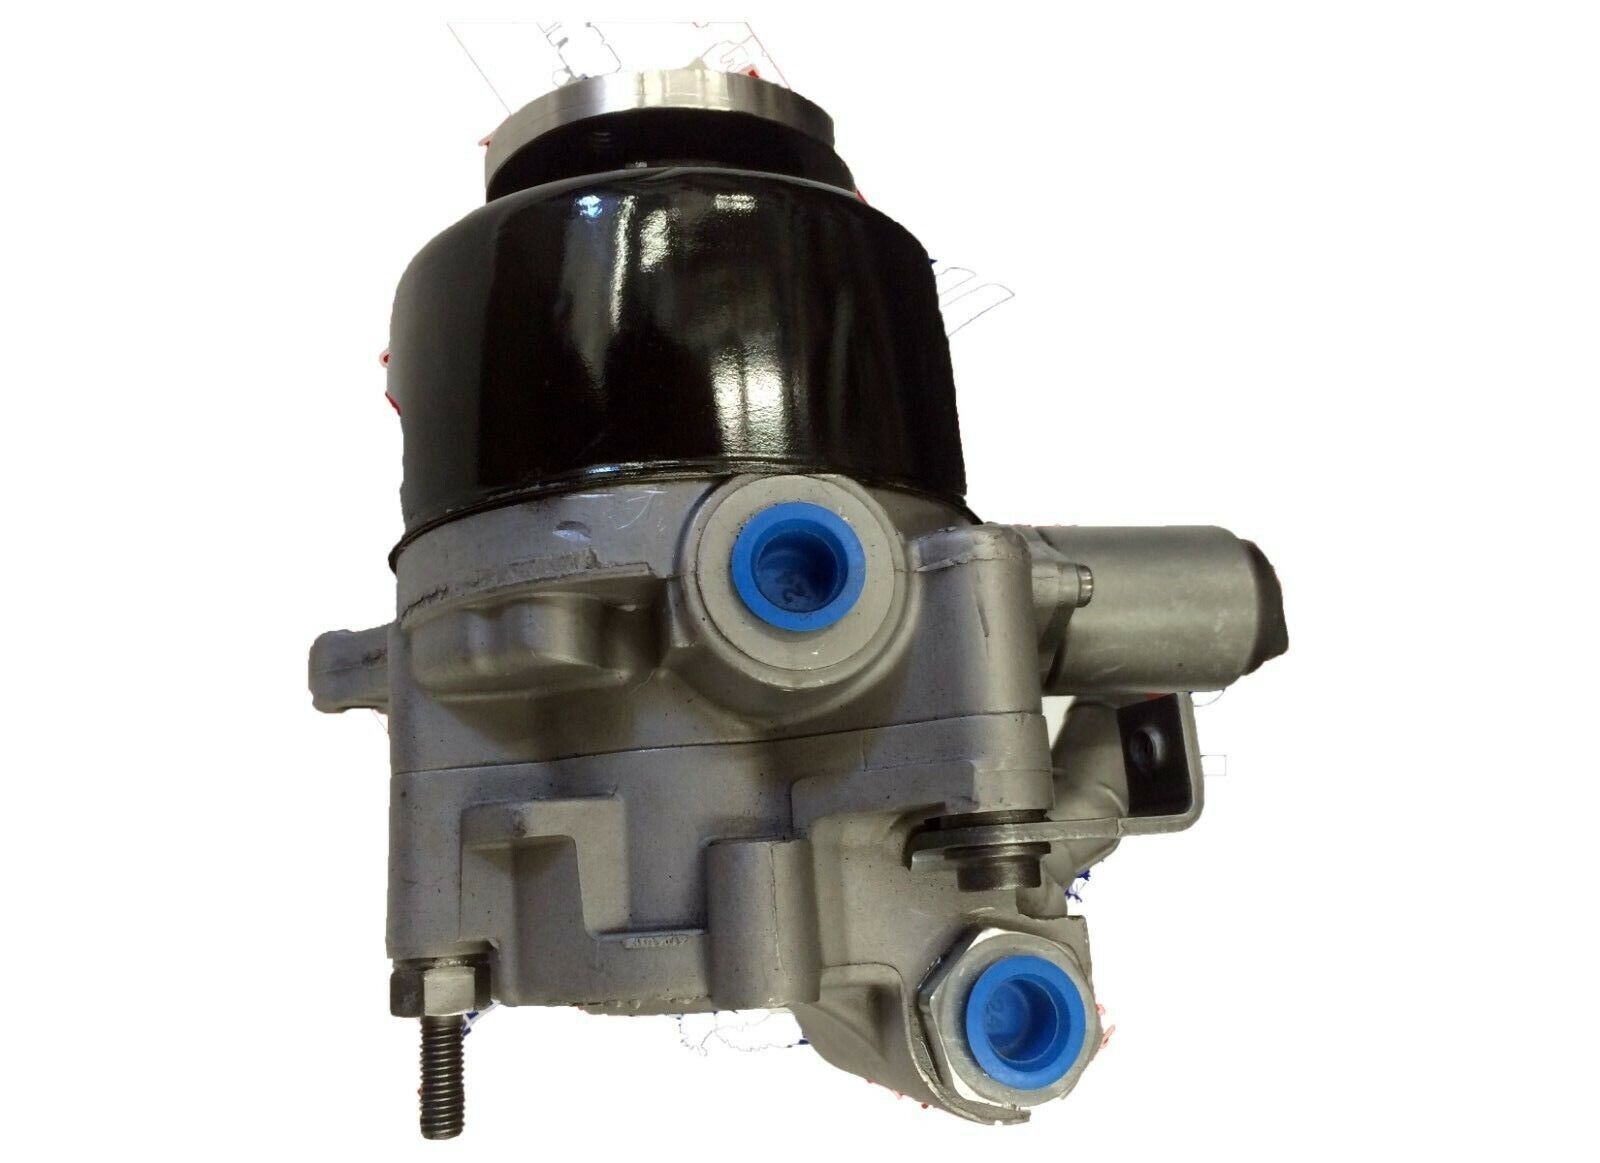 03 MERCEDES ABC TANDEM POWER STEERING PUMP SL55 AMG $495.00+$300.00 core charge)